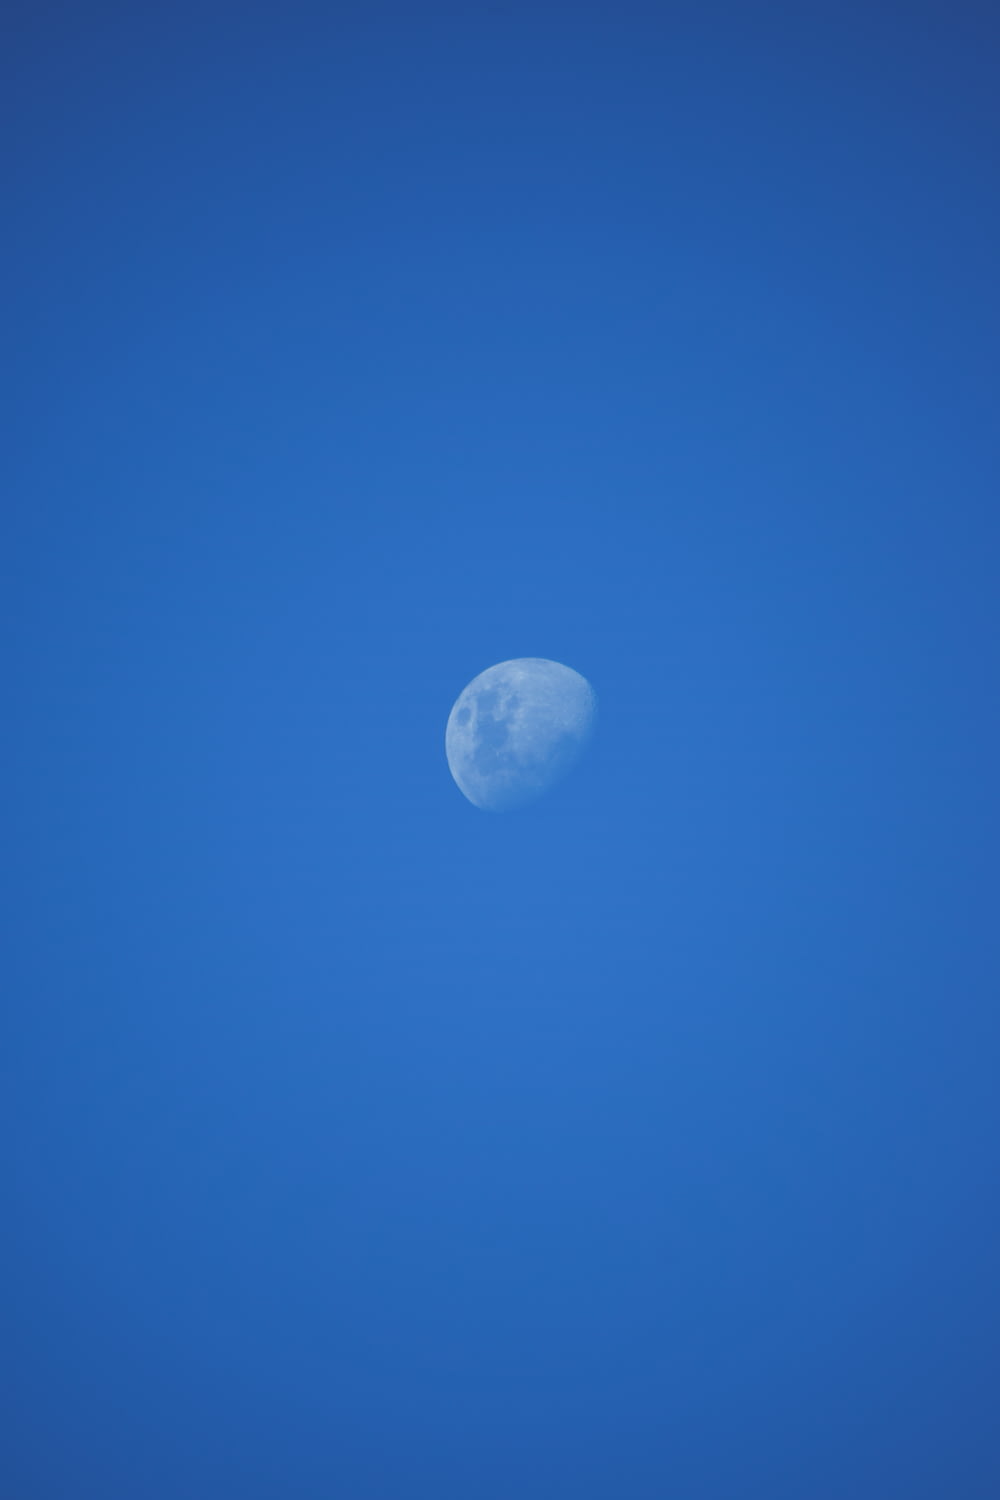 a plane flying in the sky with the moon in the background